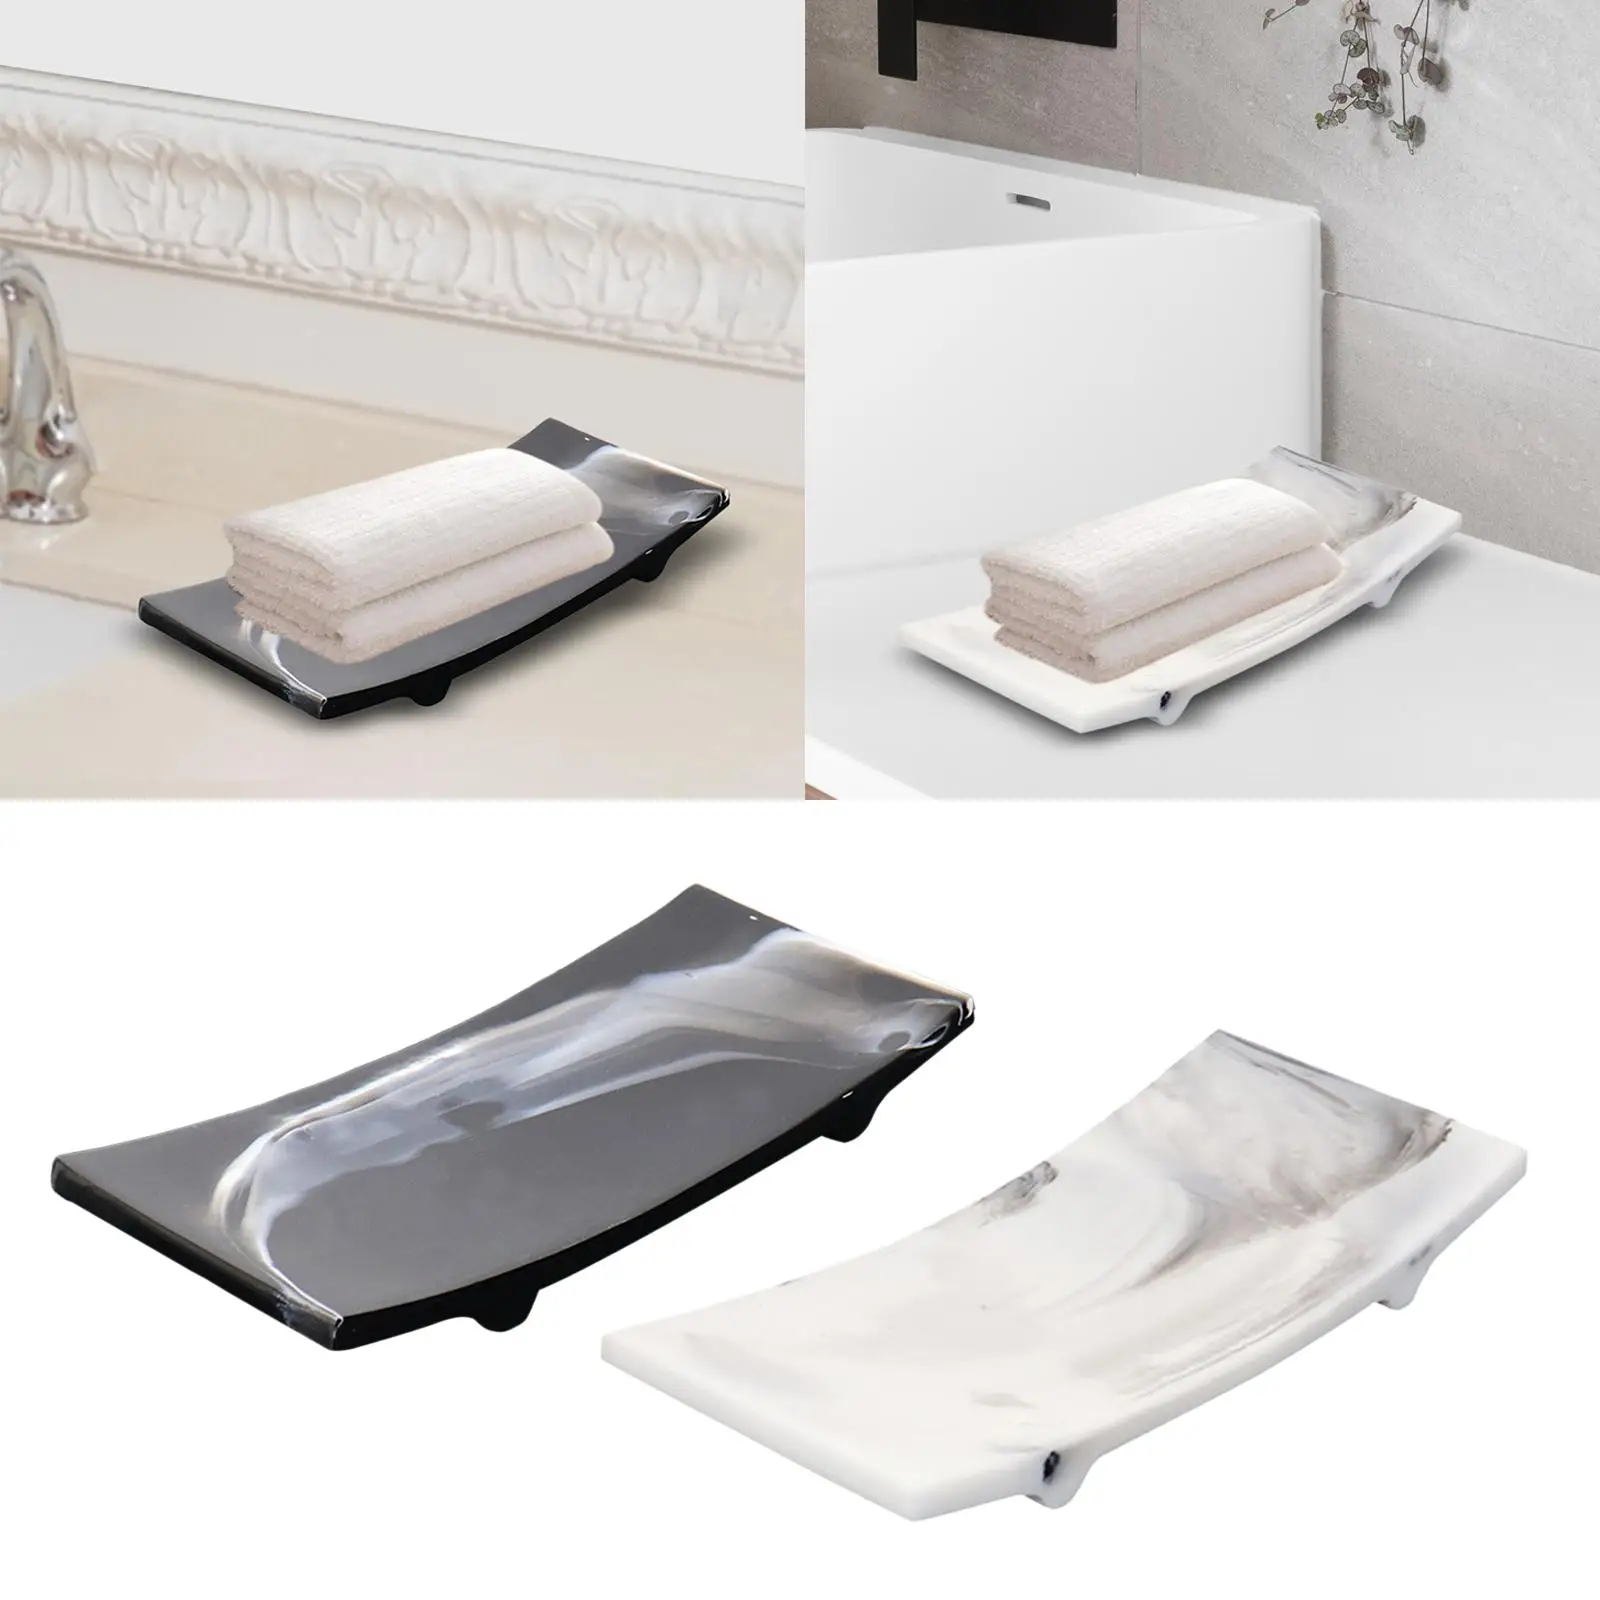 Resin Decorative Tray Bathroom Tray Towel Perfume Holder Durable for Coffee Table Elegant Design Practical Gift Trinket Tray